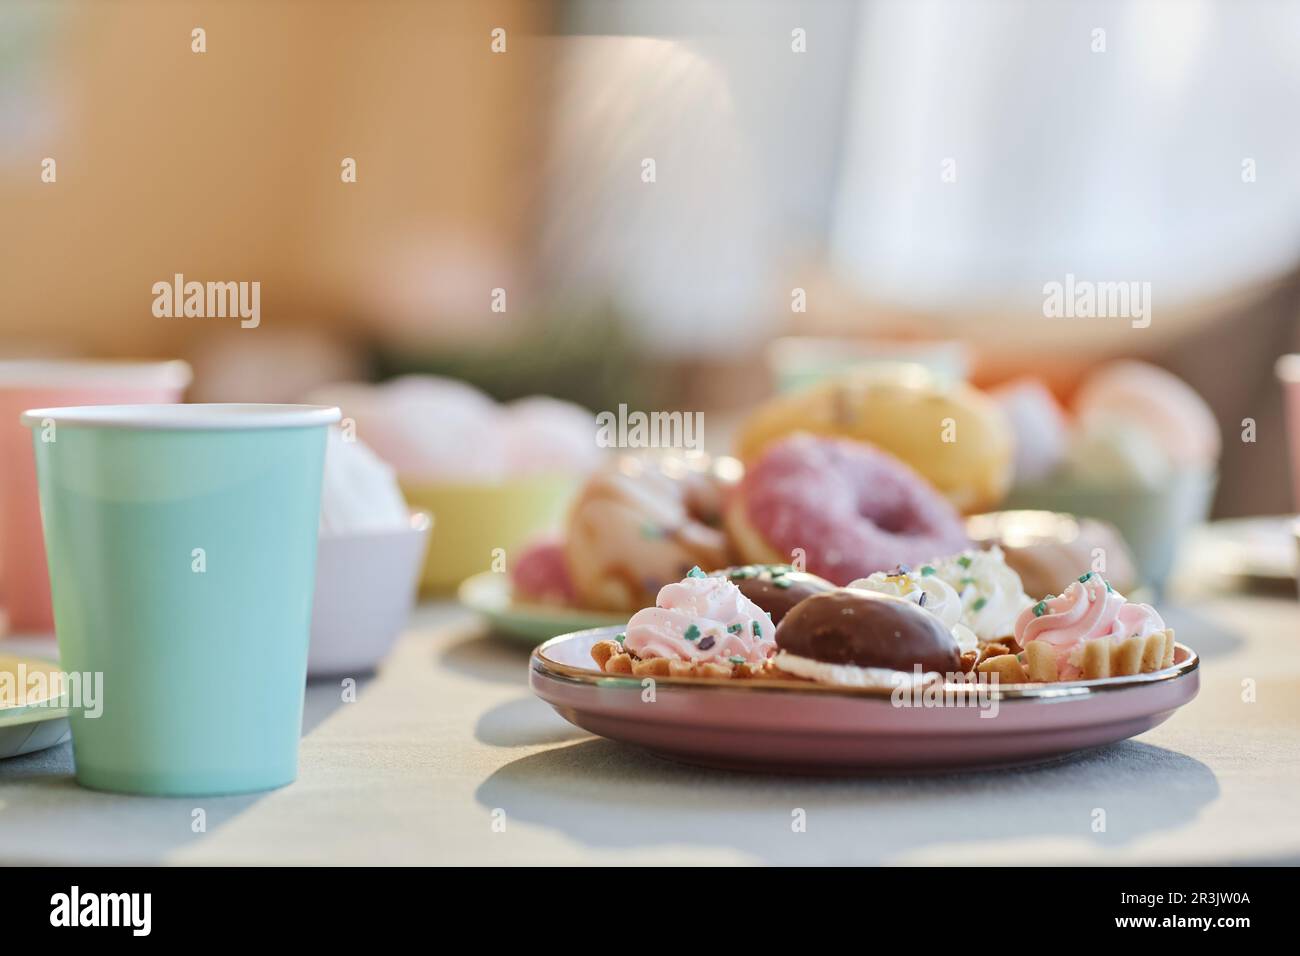 Closeup background image of table with sweets and donuts at kids party, copy space Stock Photo